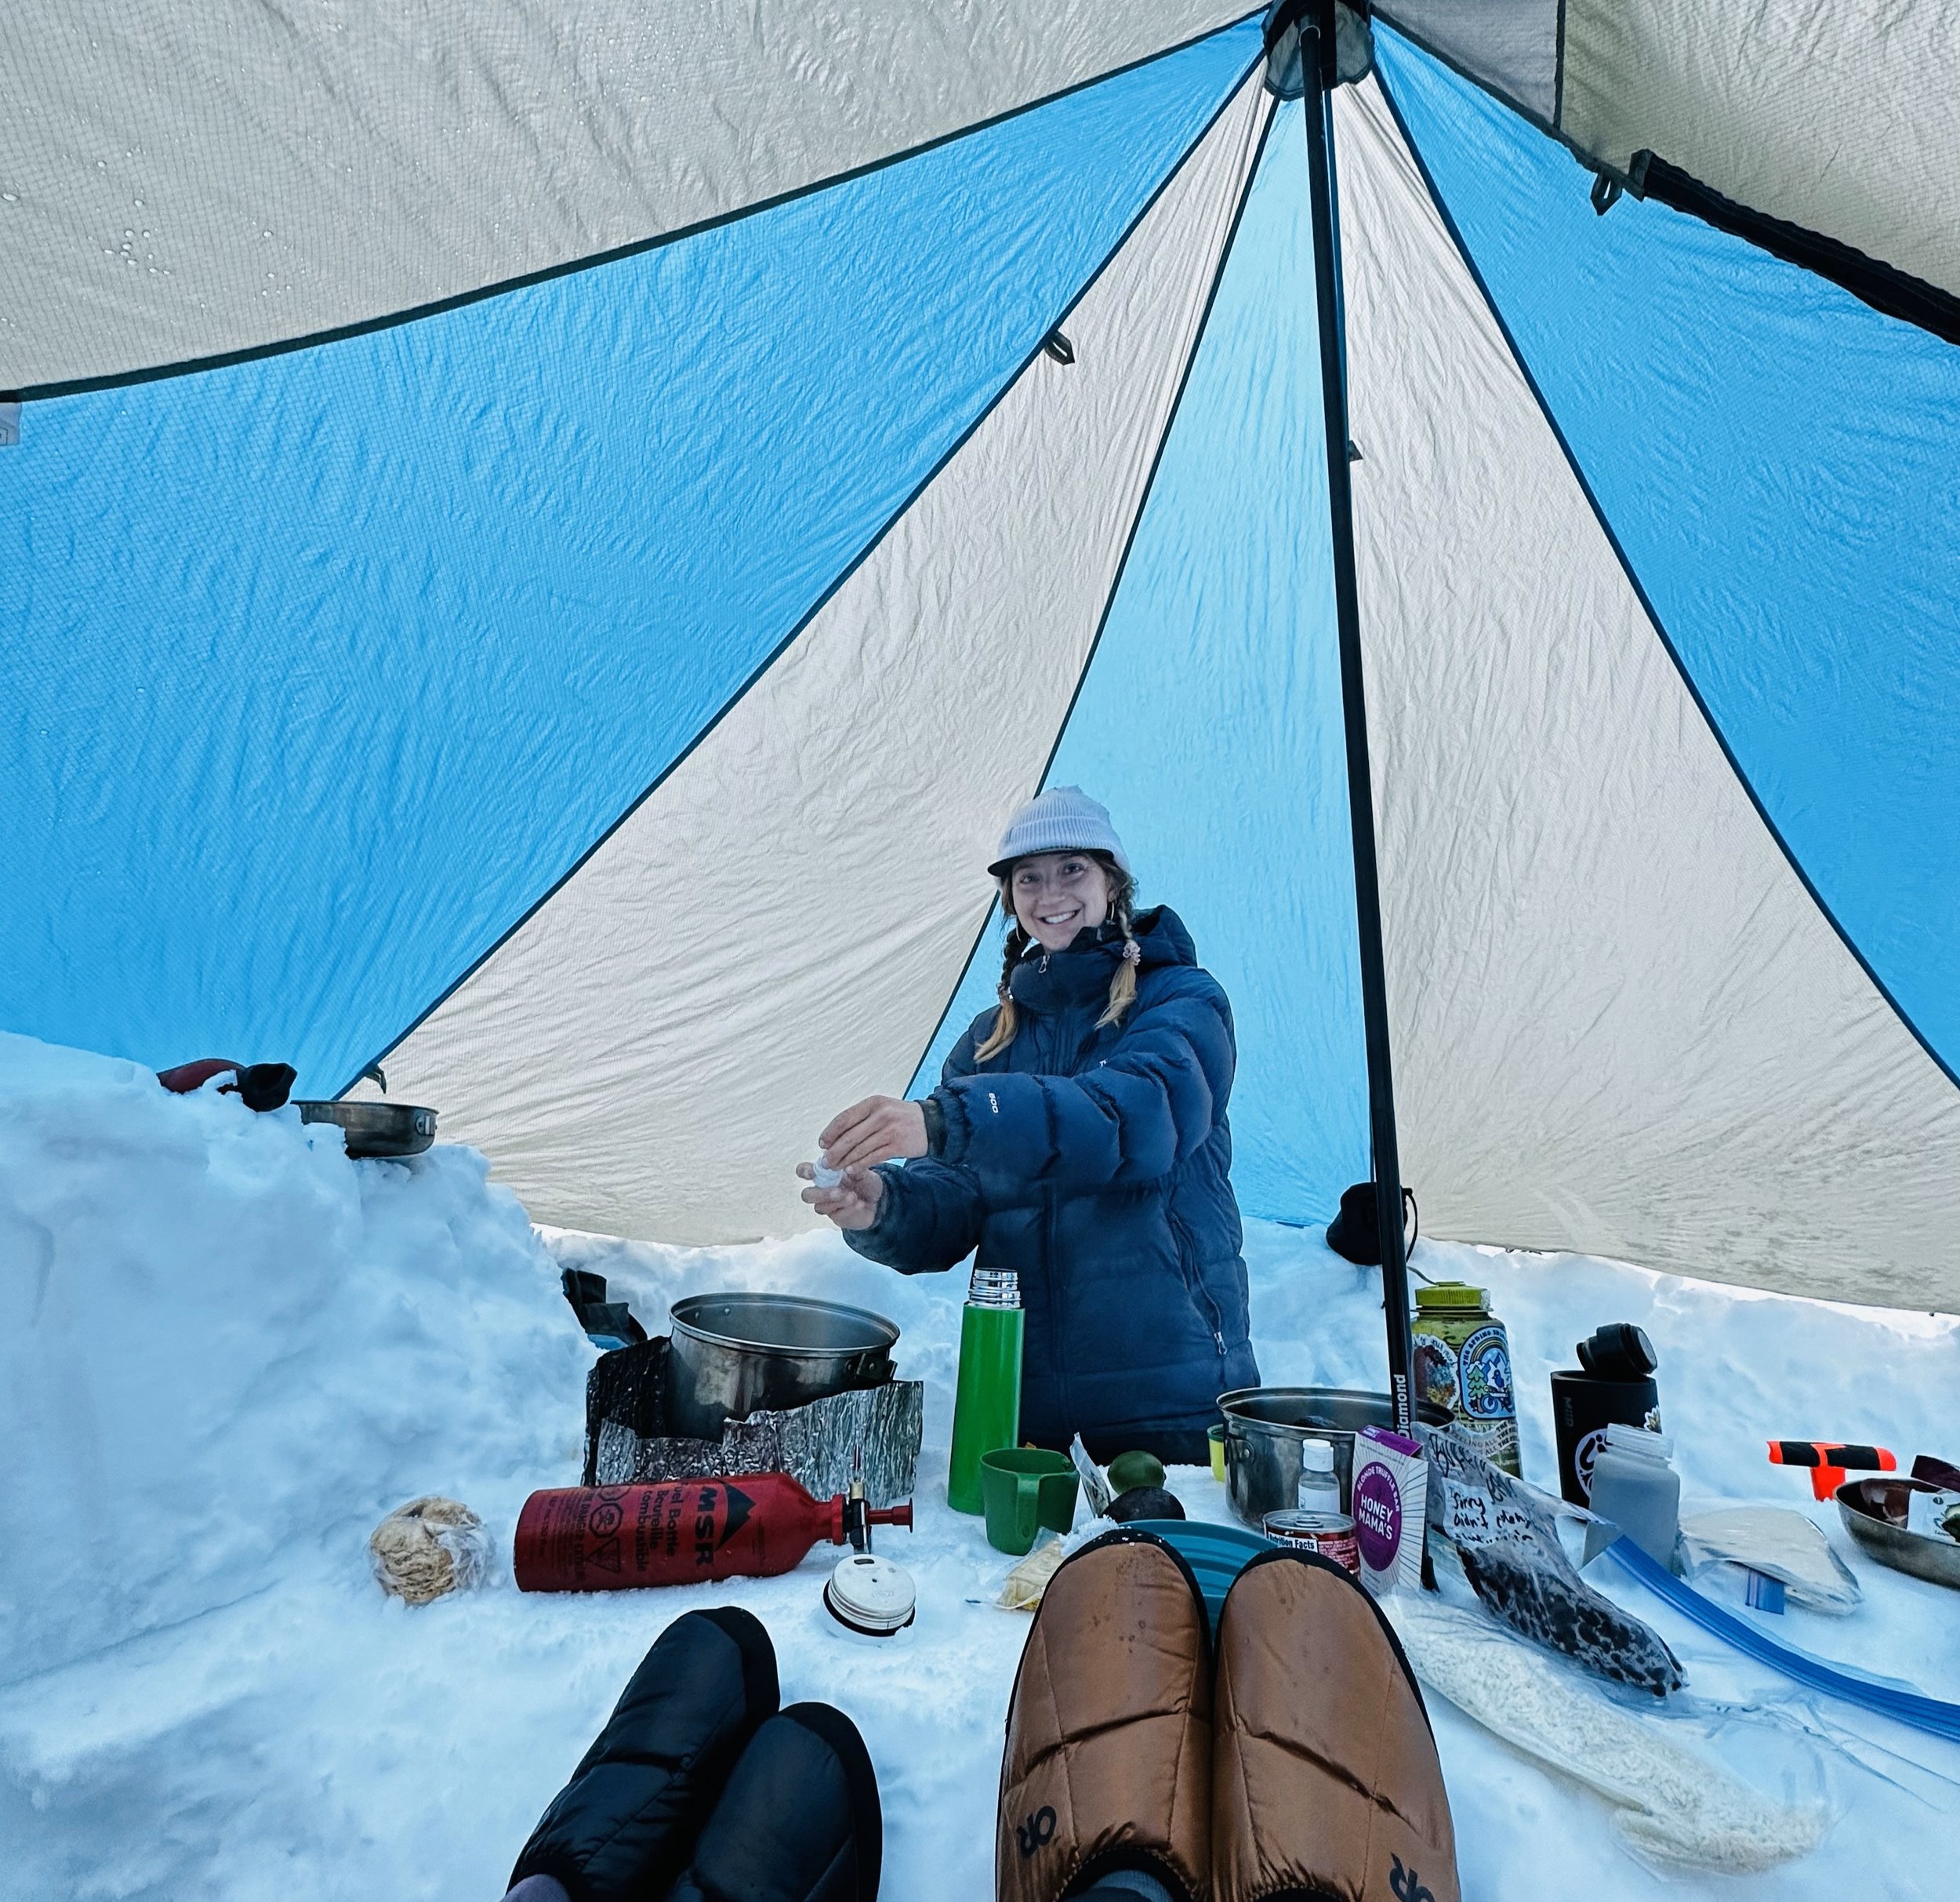 shasta mountain guide Tailor prepares a meal in the basecamp tent